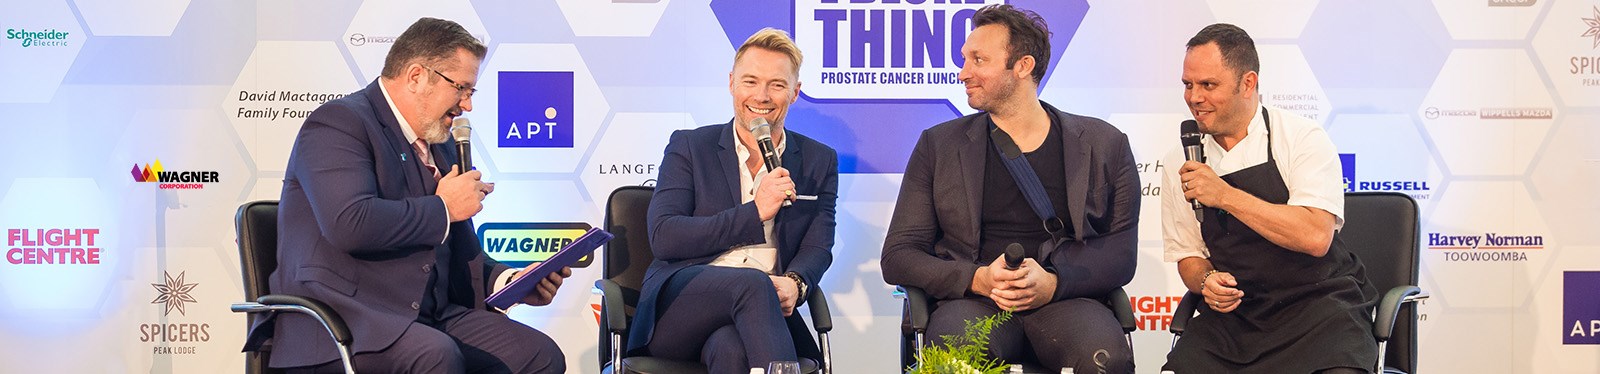 Wagner Corporation_Community Sponsorship_It's A Bloke Thing 2019 with Ronan Keating 